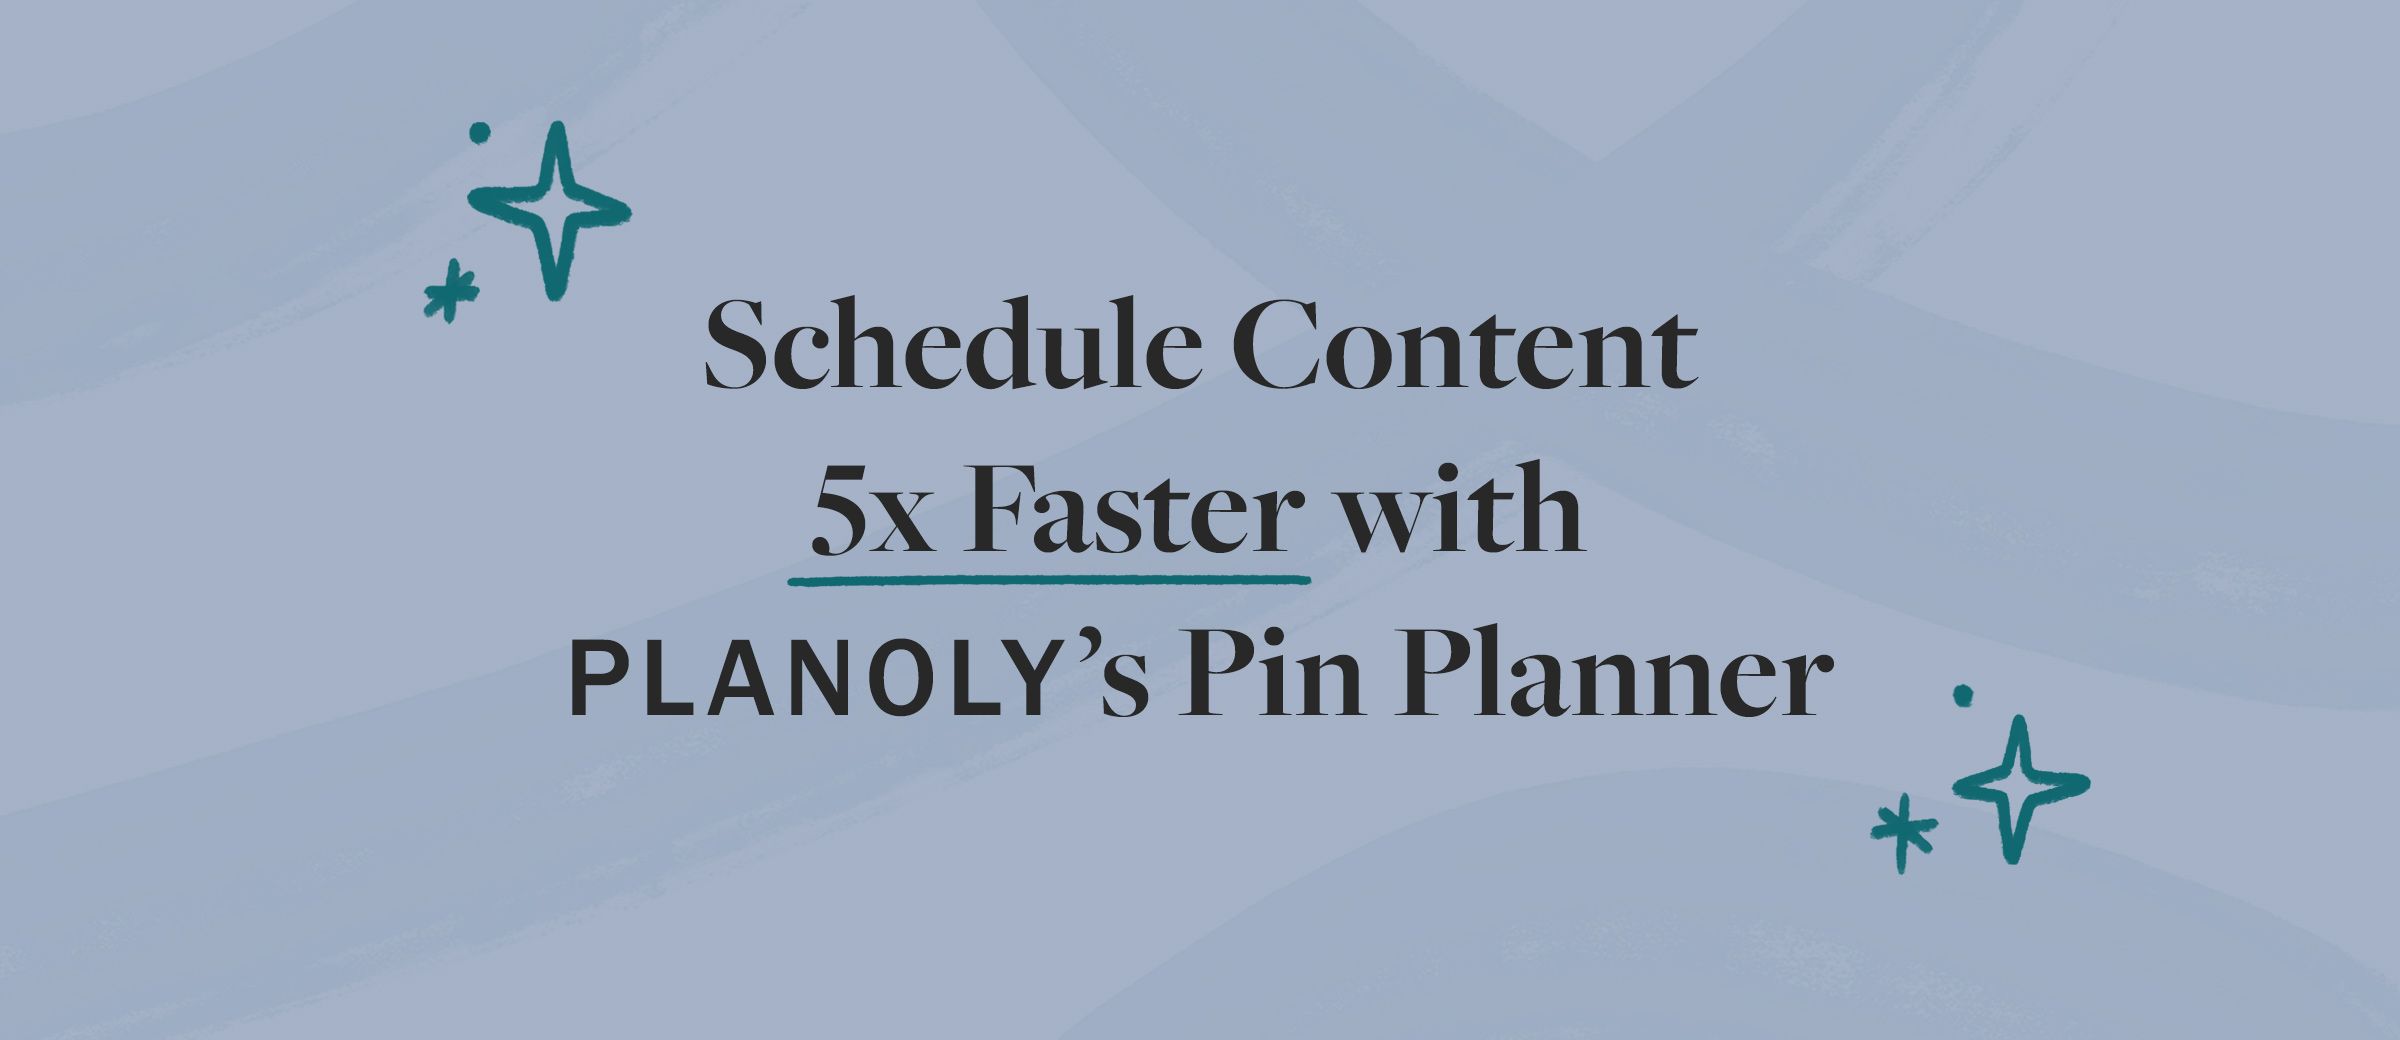 How PLANOLY Uses Campaigns for Pinterest Strategies, by reilly-purl